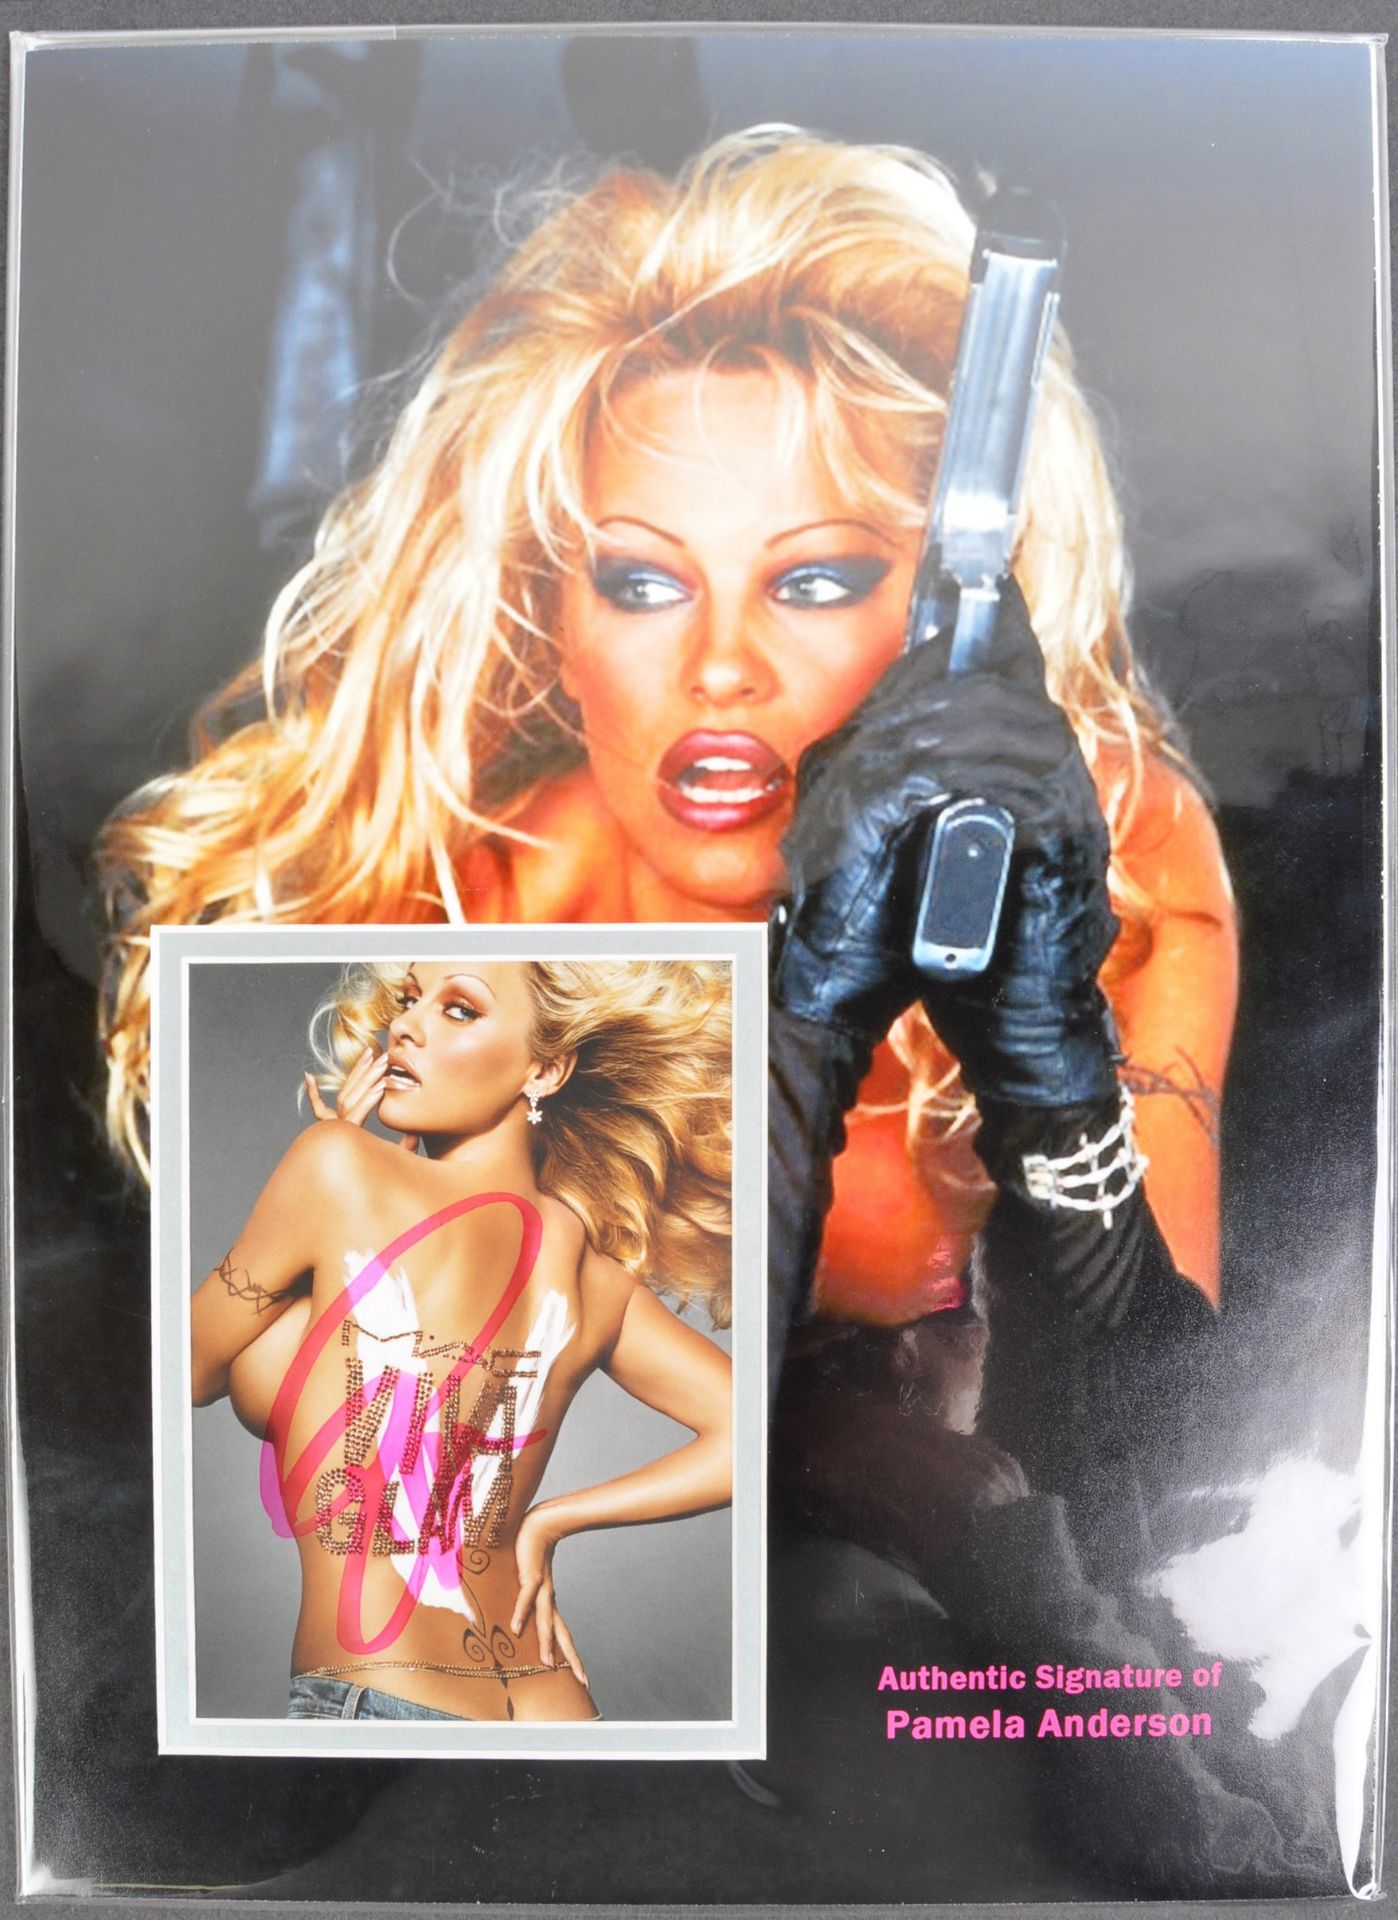 PAMELA ANDERSON - BARBED WIRE - 16X12" AUTOGRAPH DISPLAY